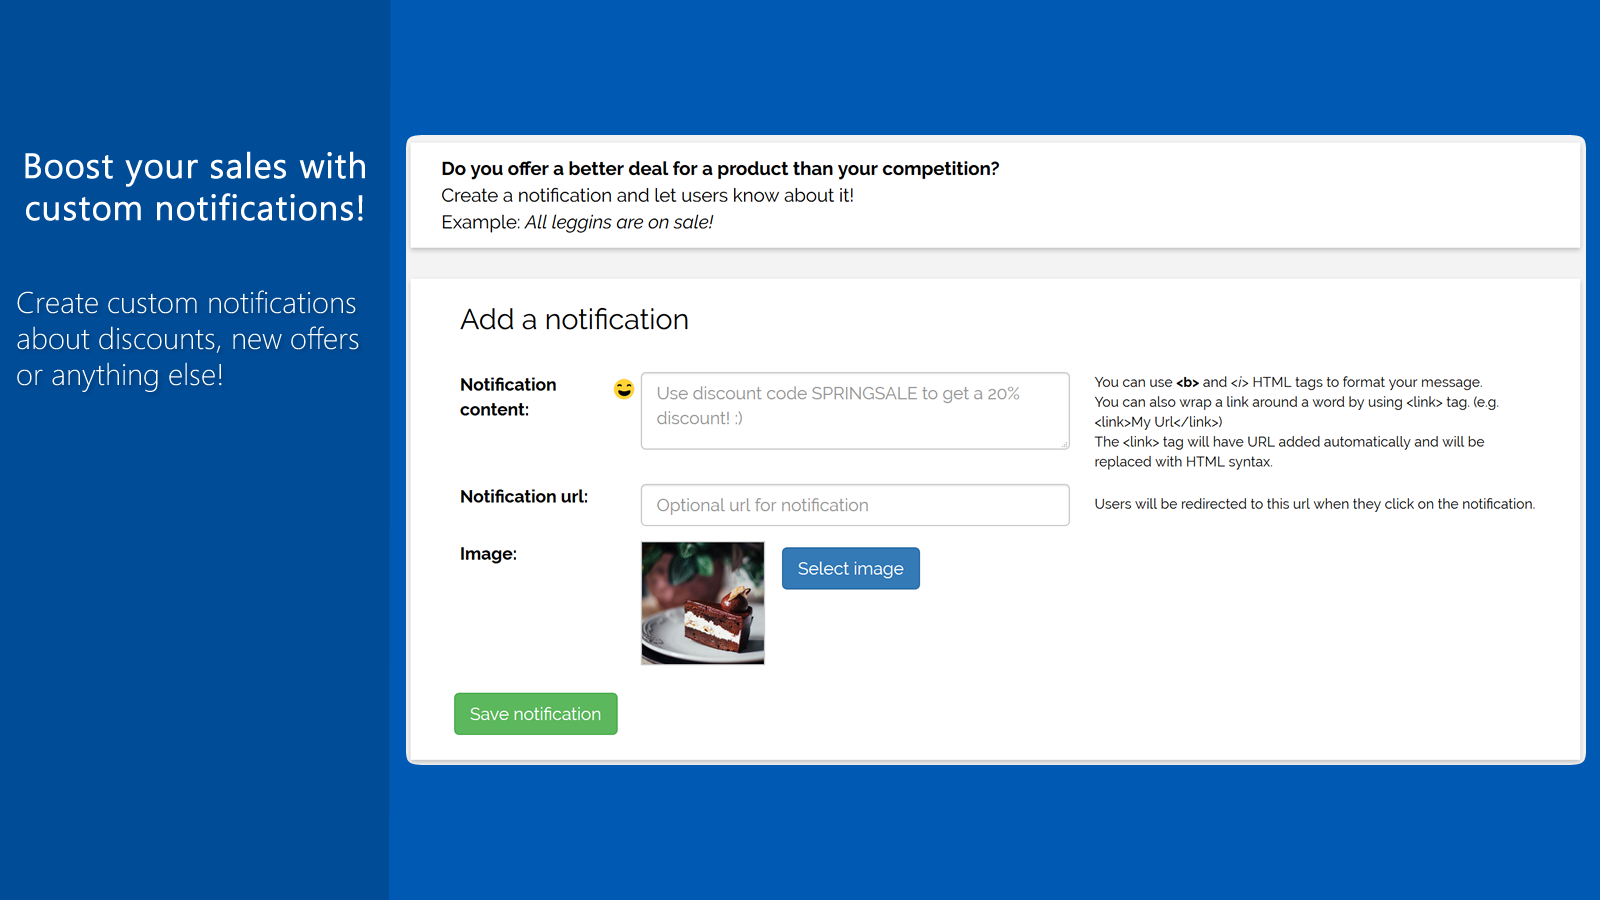 Boost sales with custom sales notifications